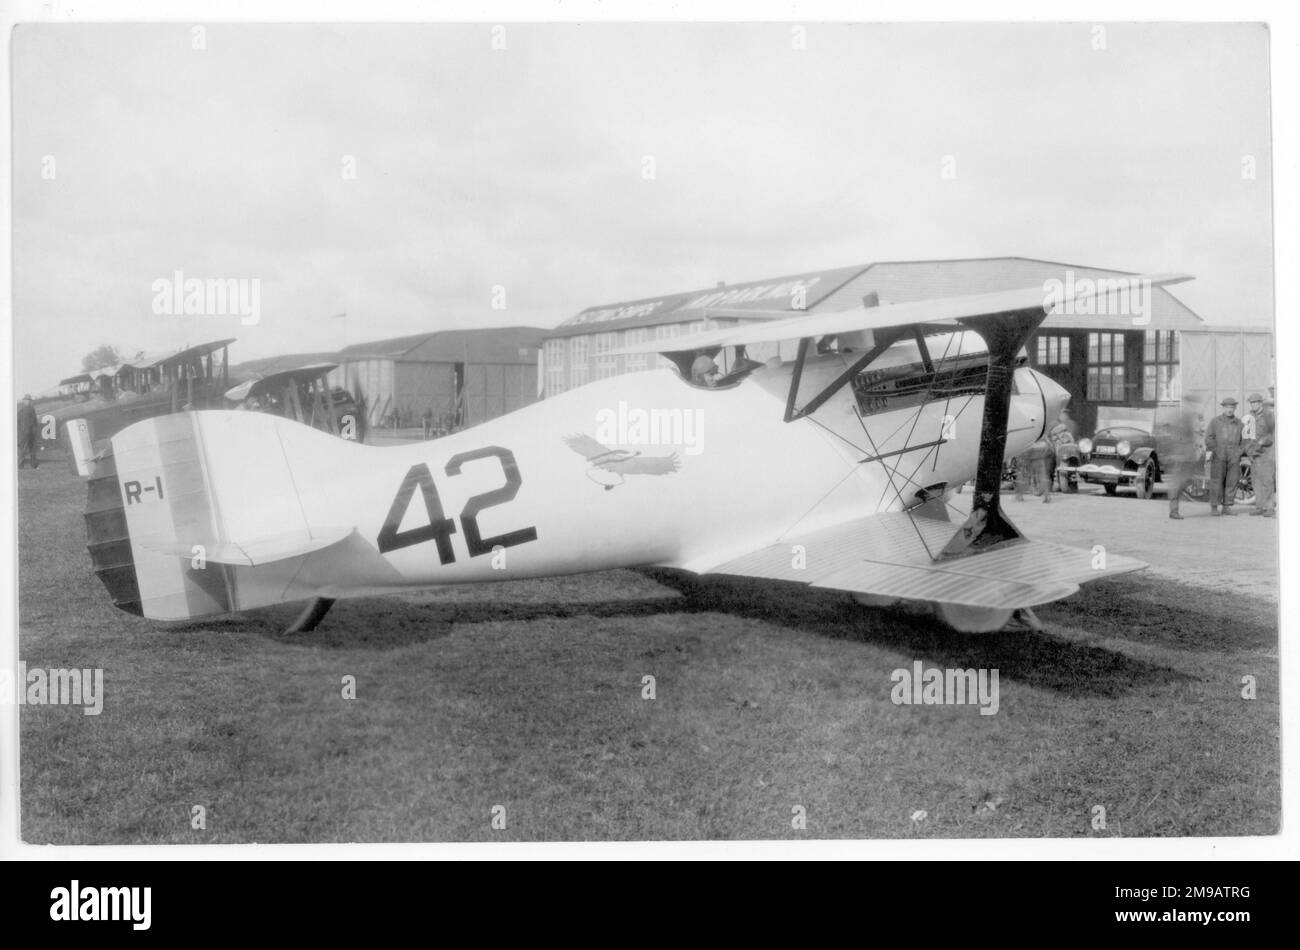 Verville-Packard VCP-R AS.40126 '42', at the 1920 Pulitzer air race. A racing aircraft modified from an Engineering Division VCP-1, powered by a 638hp Packard 1A-2025, water-cooled V-12 engine (re-designated R-1 in 1922). Stock Photo